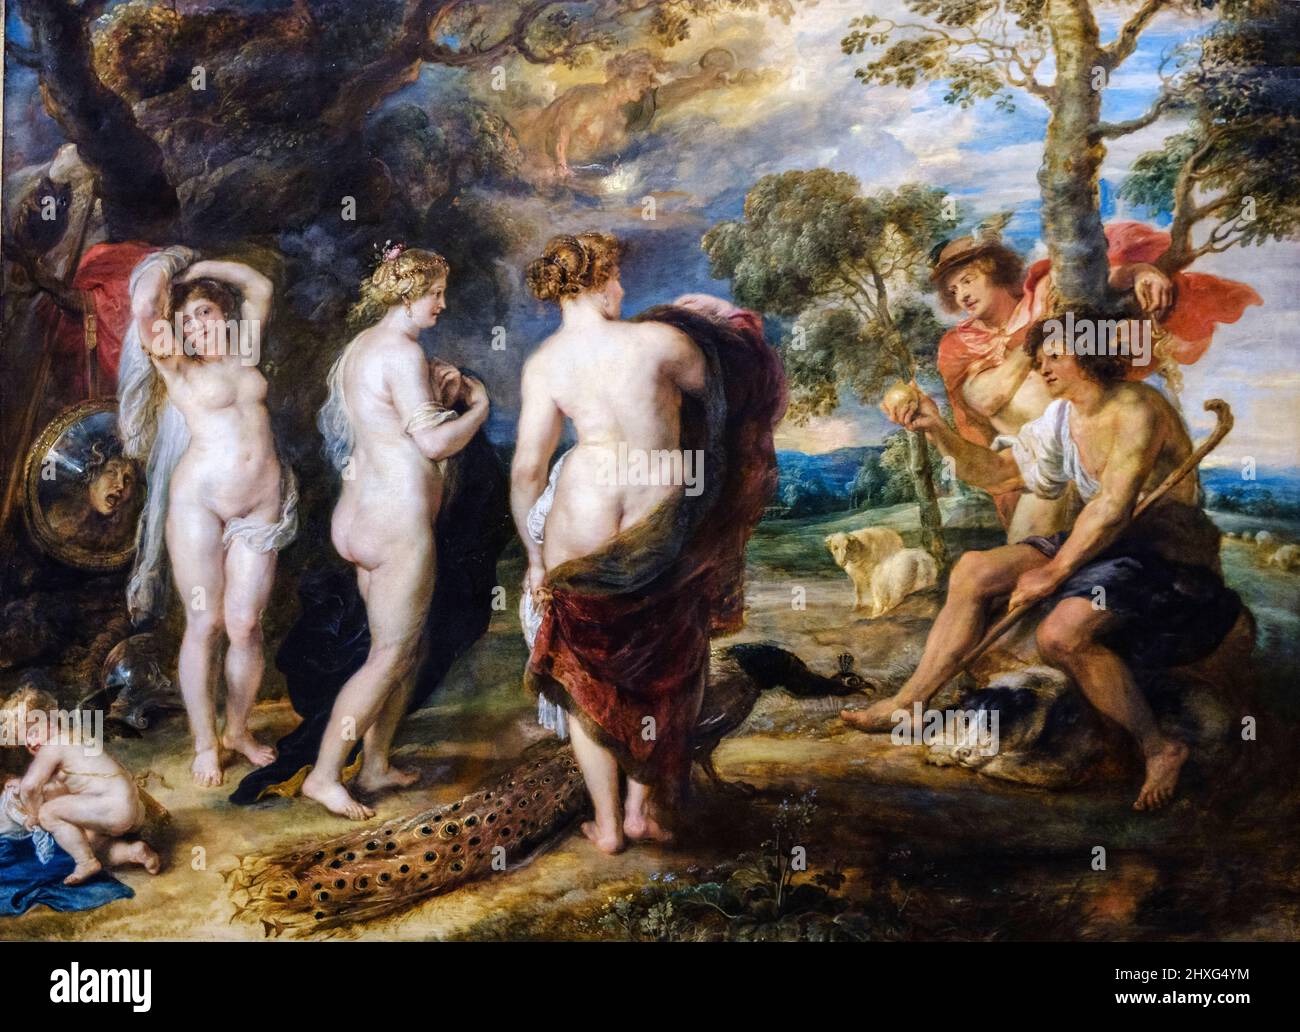 Peter Paul Rubens, the Judgement of paris, oil on canvas, National Gallery, London, England, Great Britain. Stock Photo